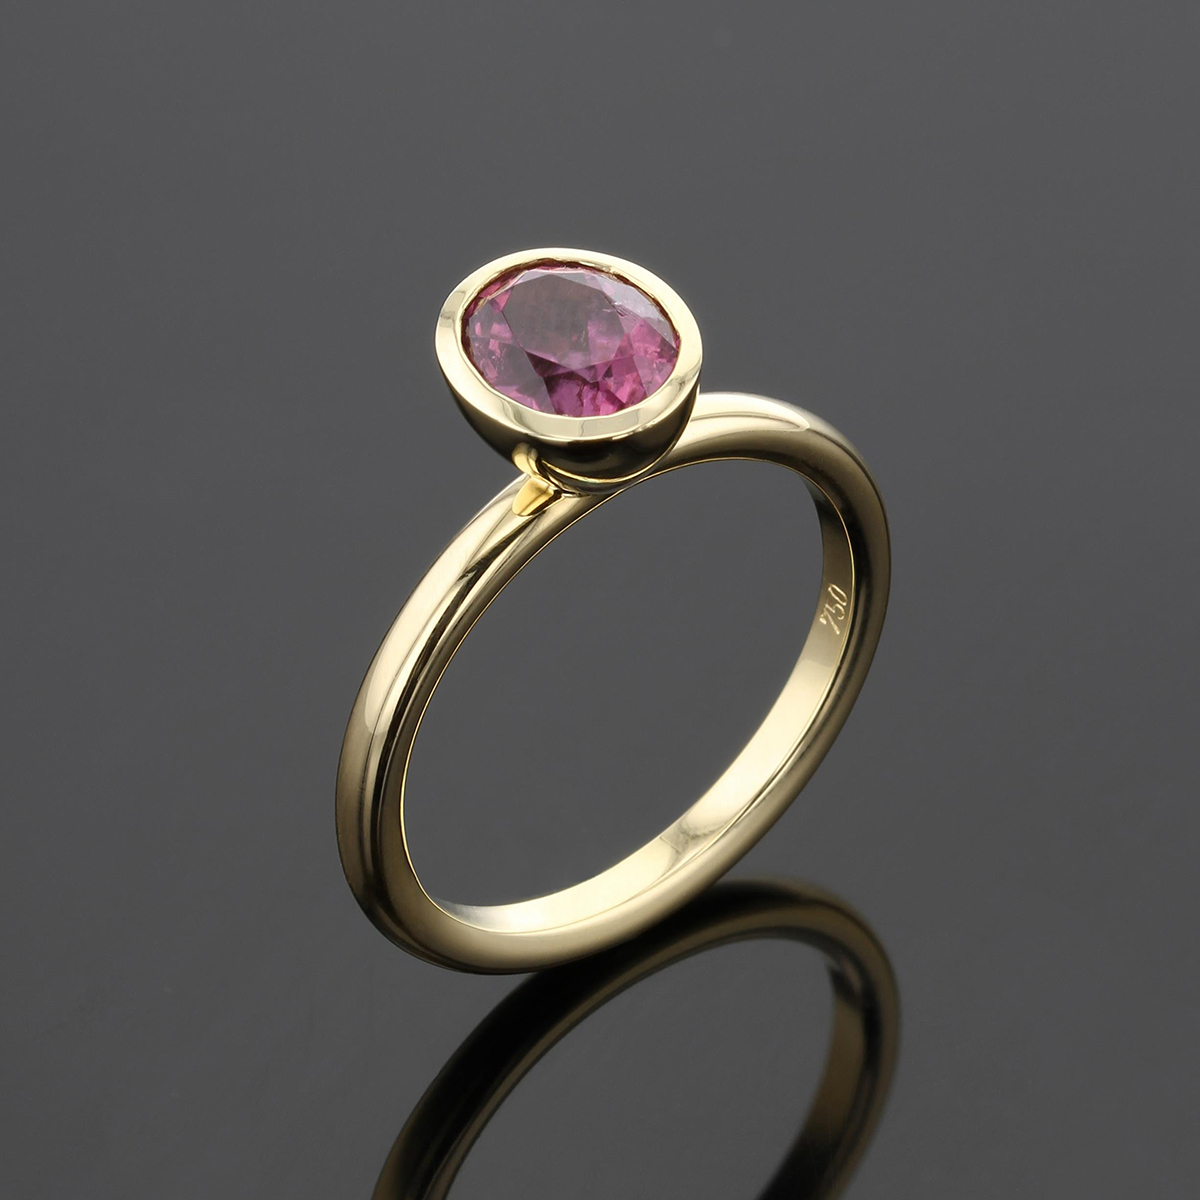 Ring in polished yellow gold with an oval shaped Pink Tourmaline.